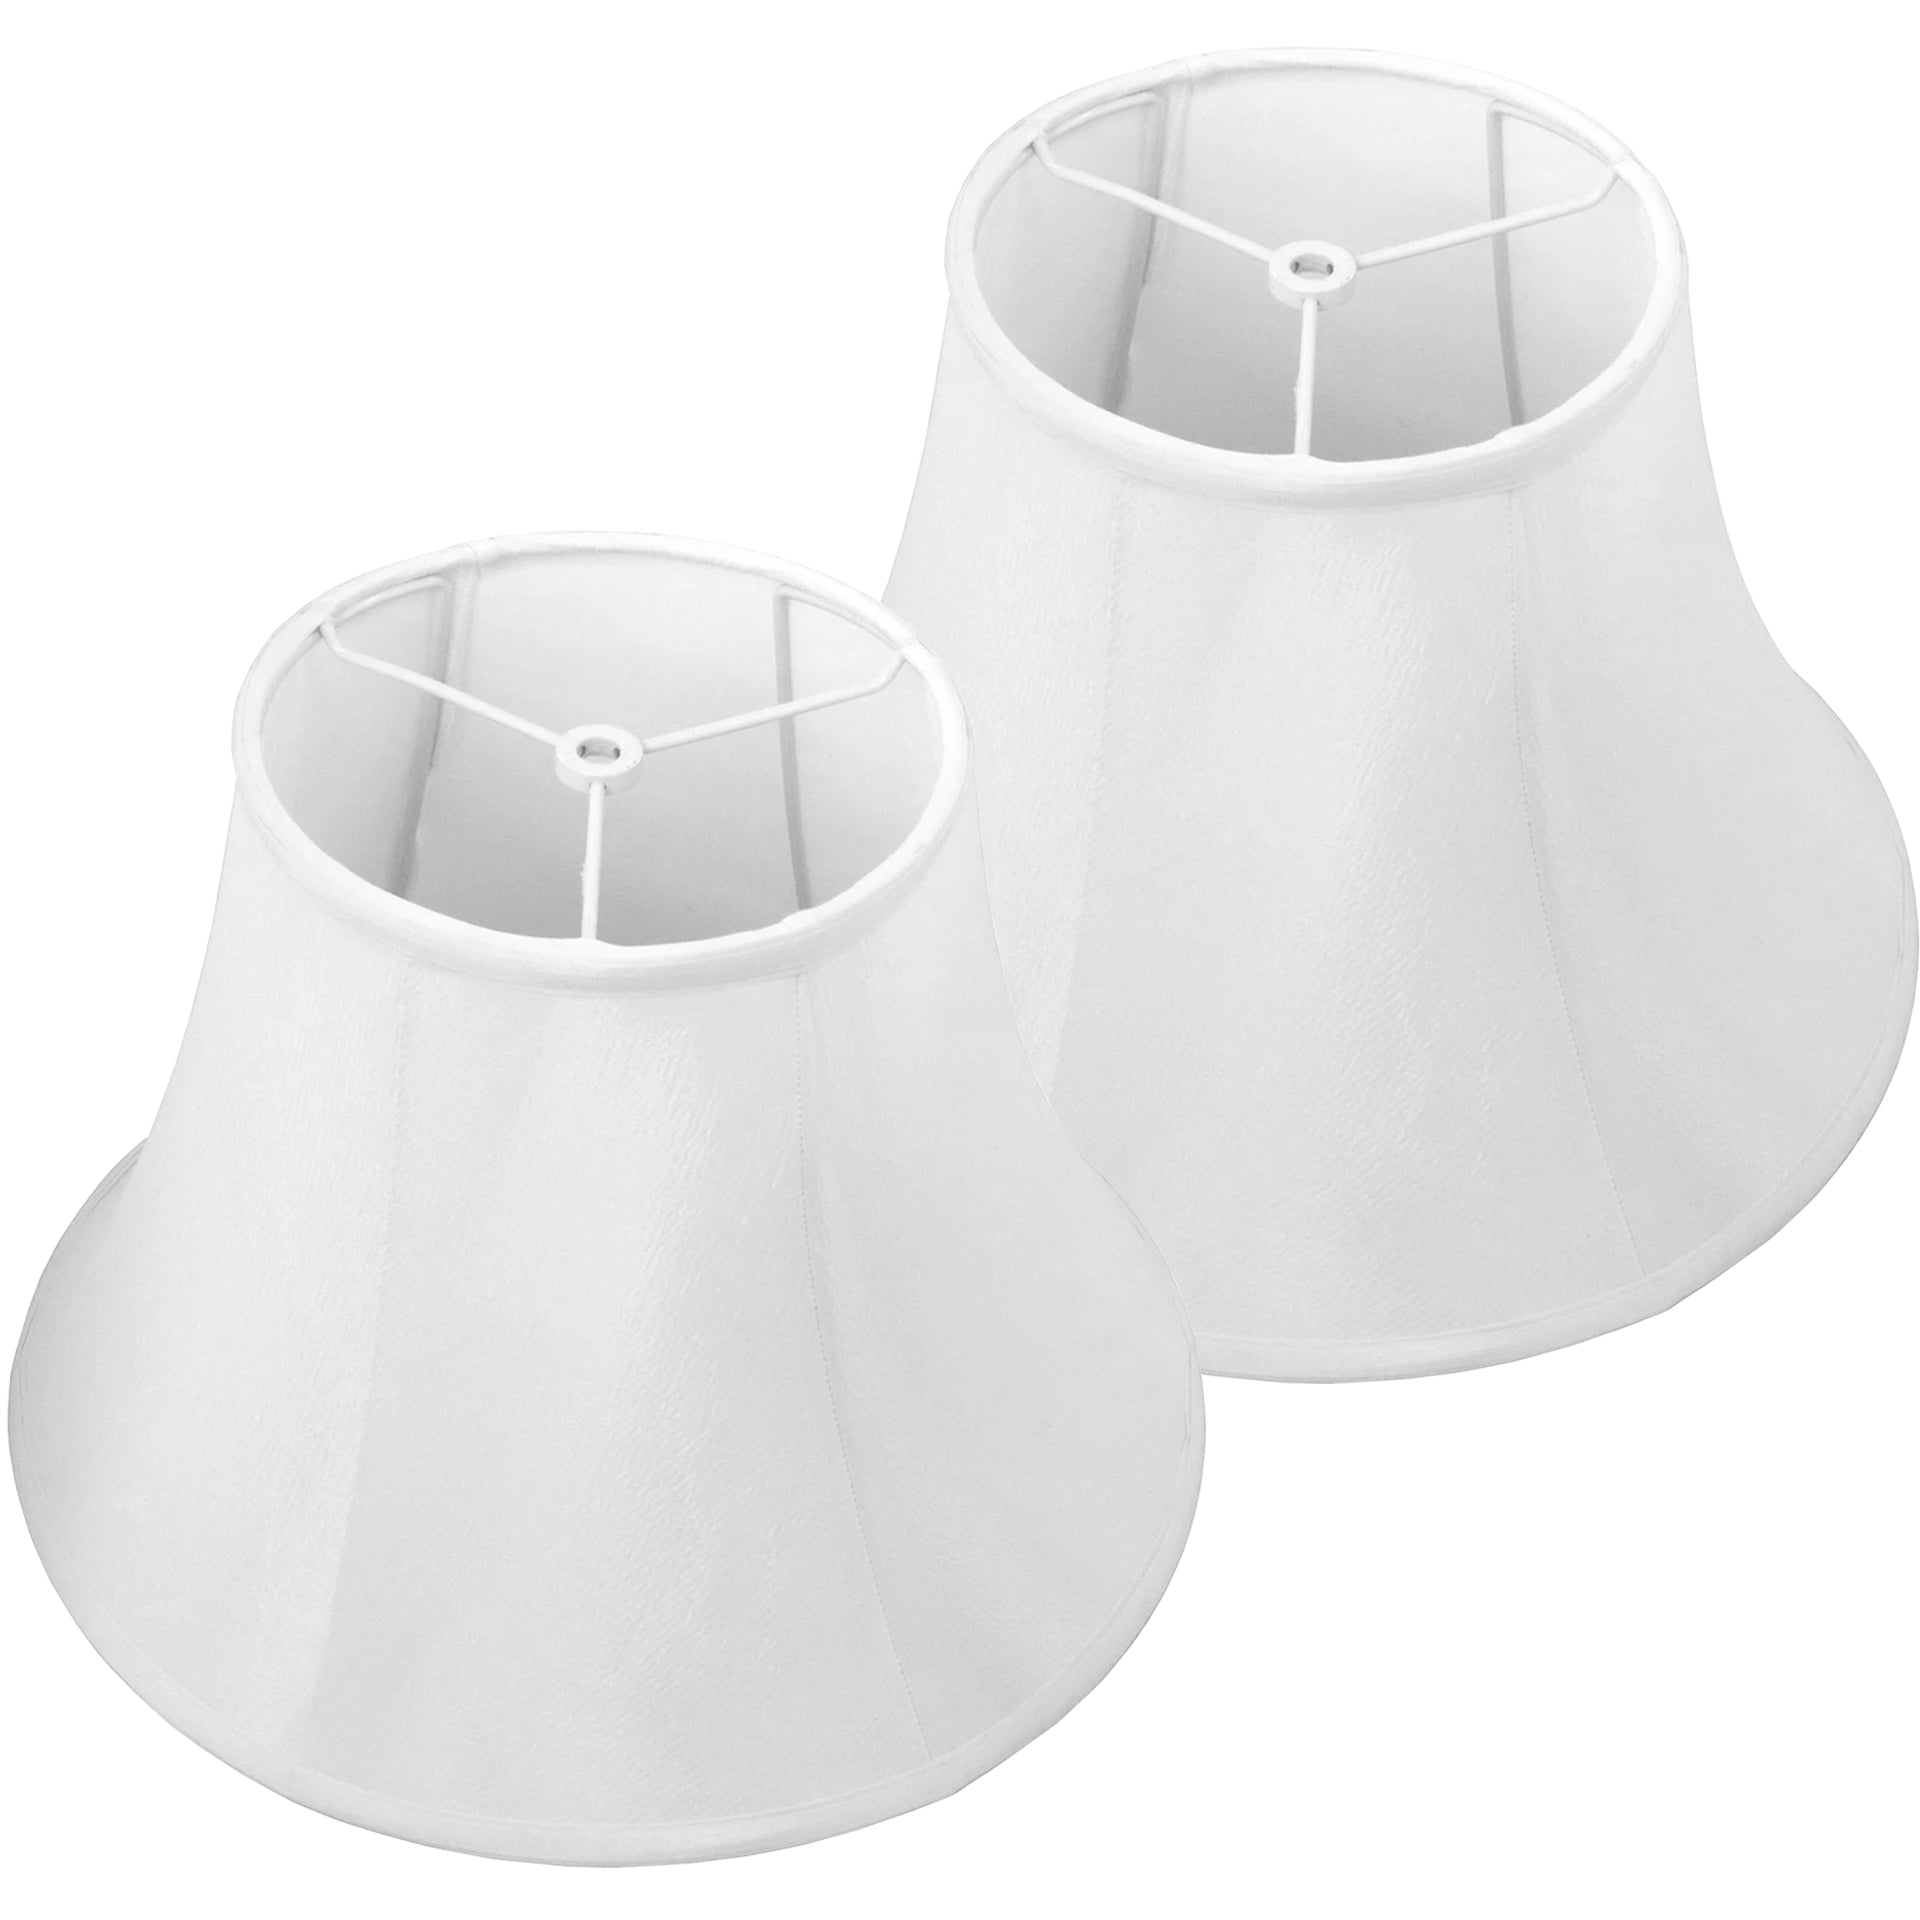 Carro Home Ivory White Bell Lamp Shade 7x12x9 (Spider Fitting) - Set of 2 